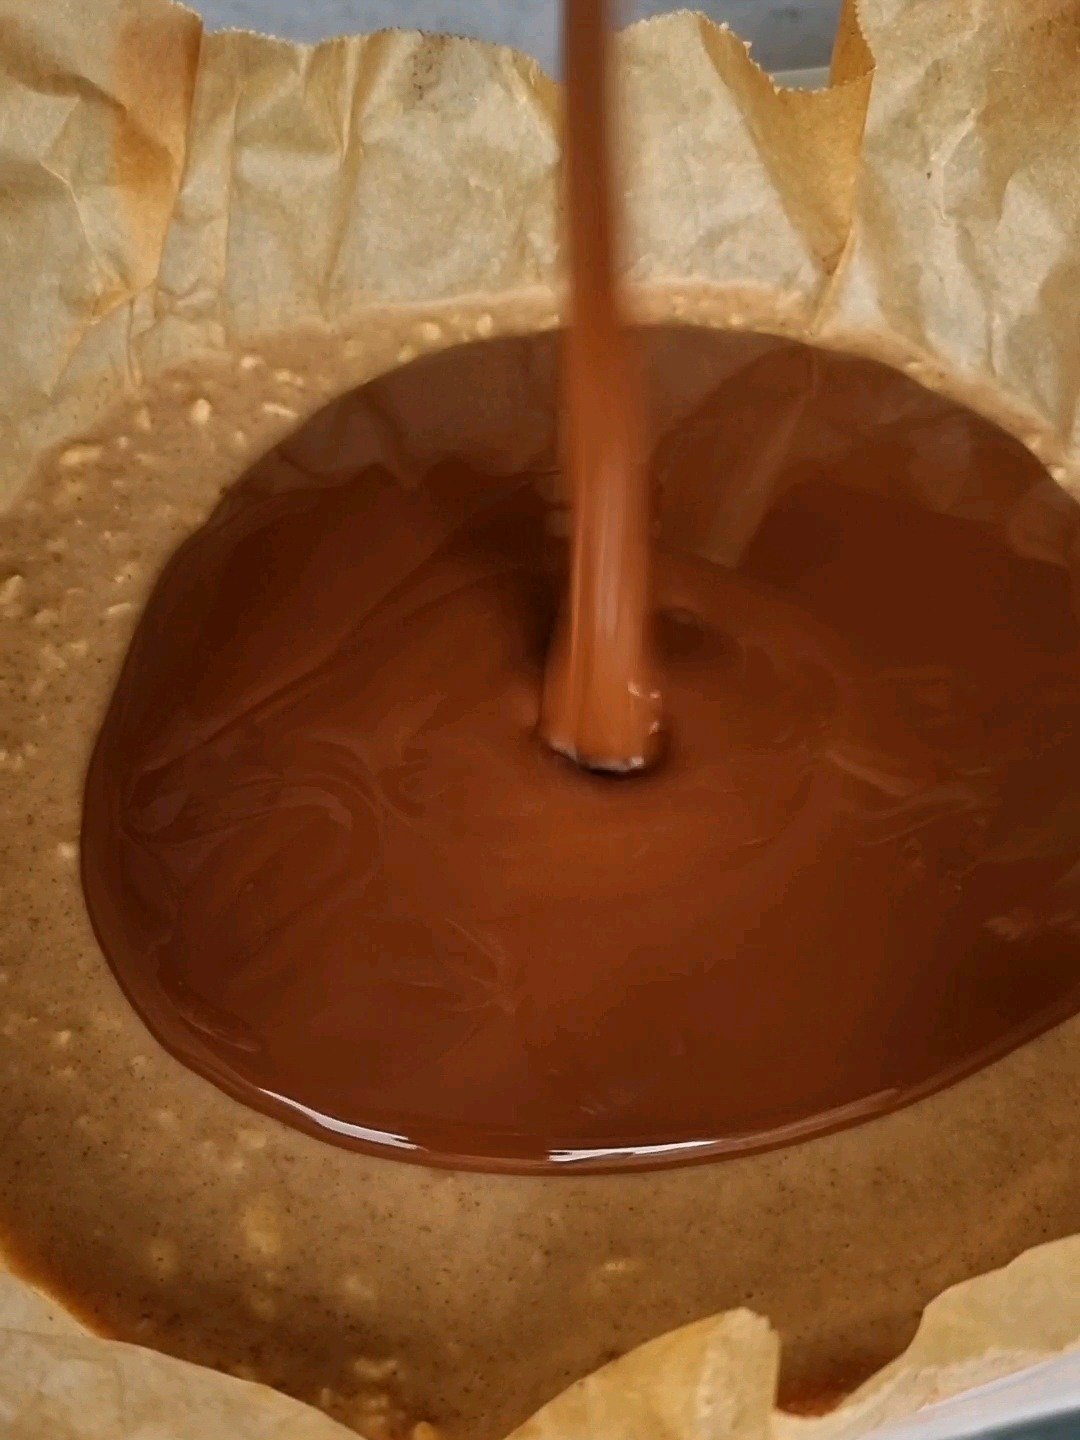 Pouring the melted chocolate on top of peanut butter